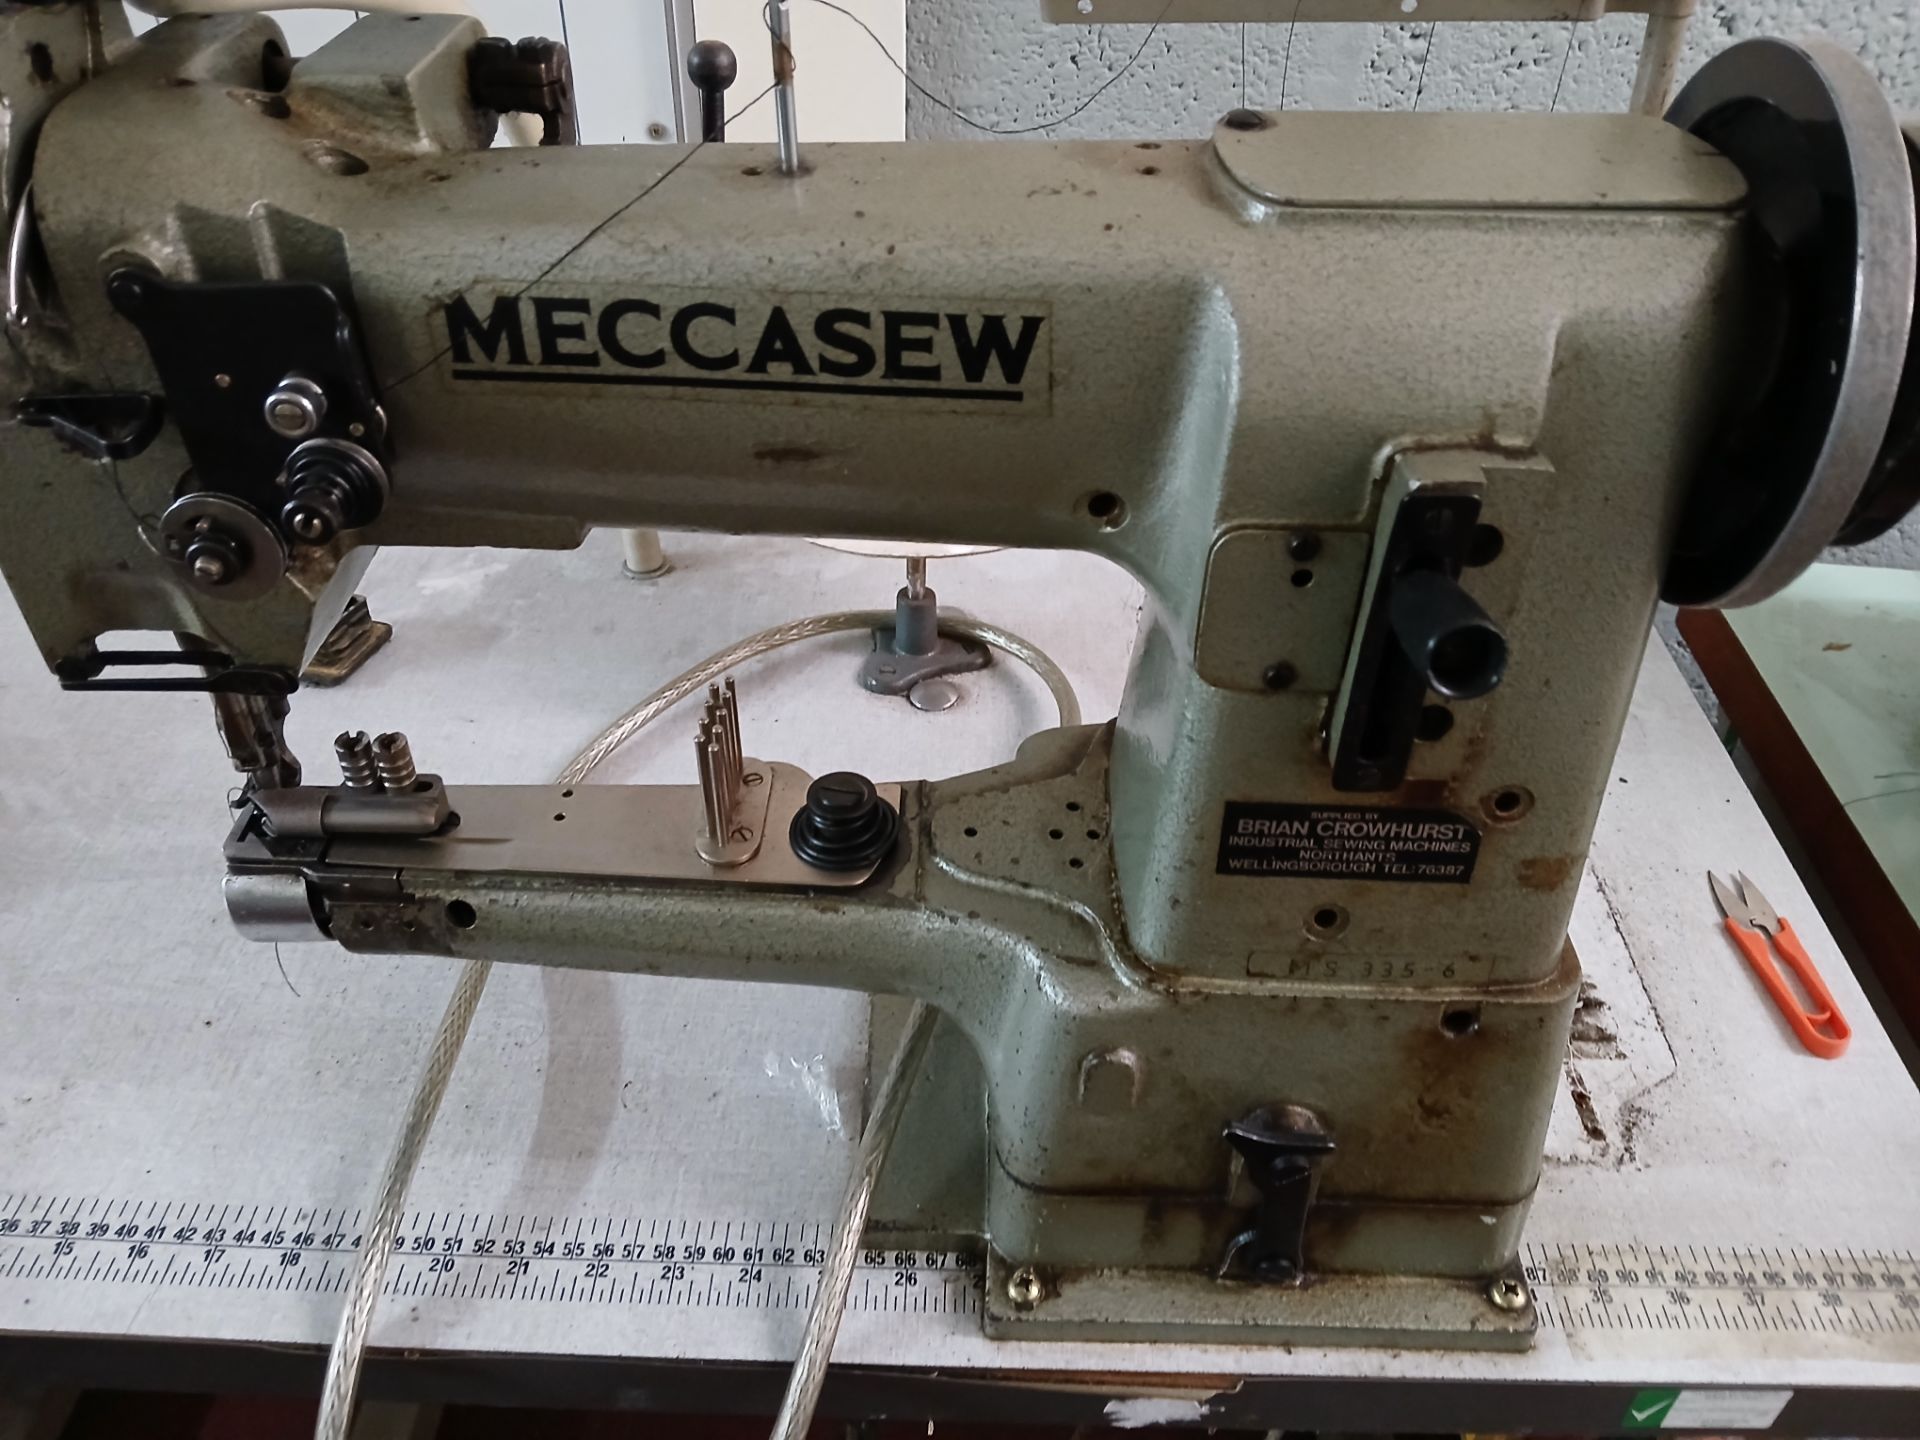 Meccasew walking foot cylinder sewing machine 240v - Image 3 of 3